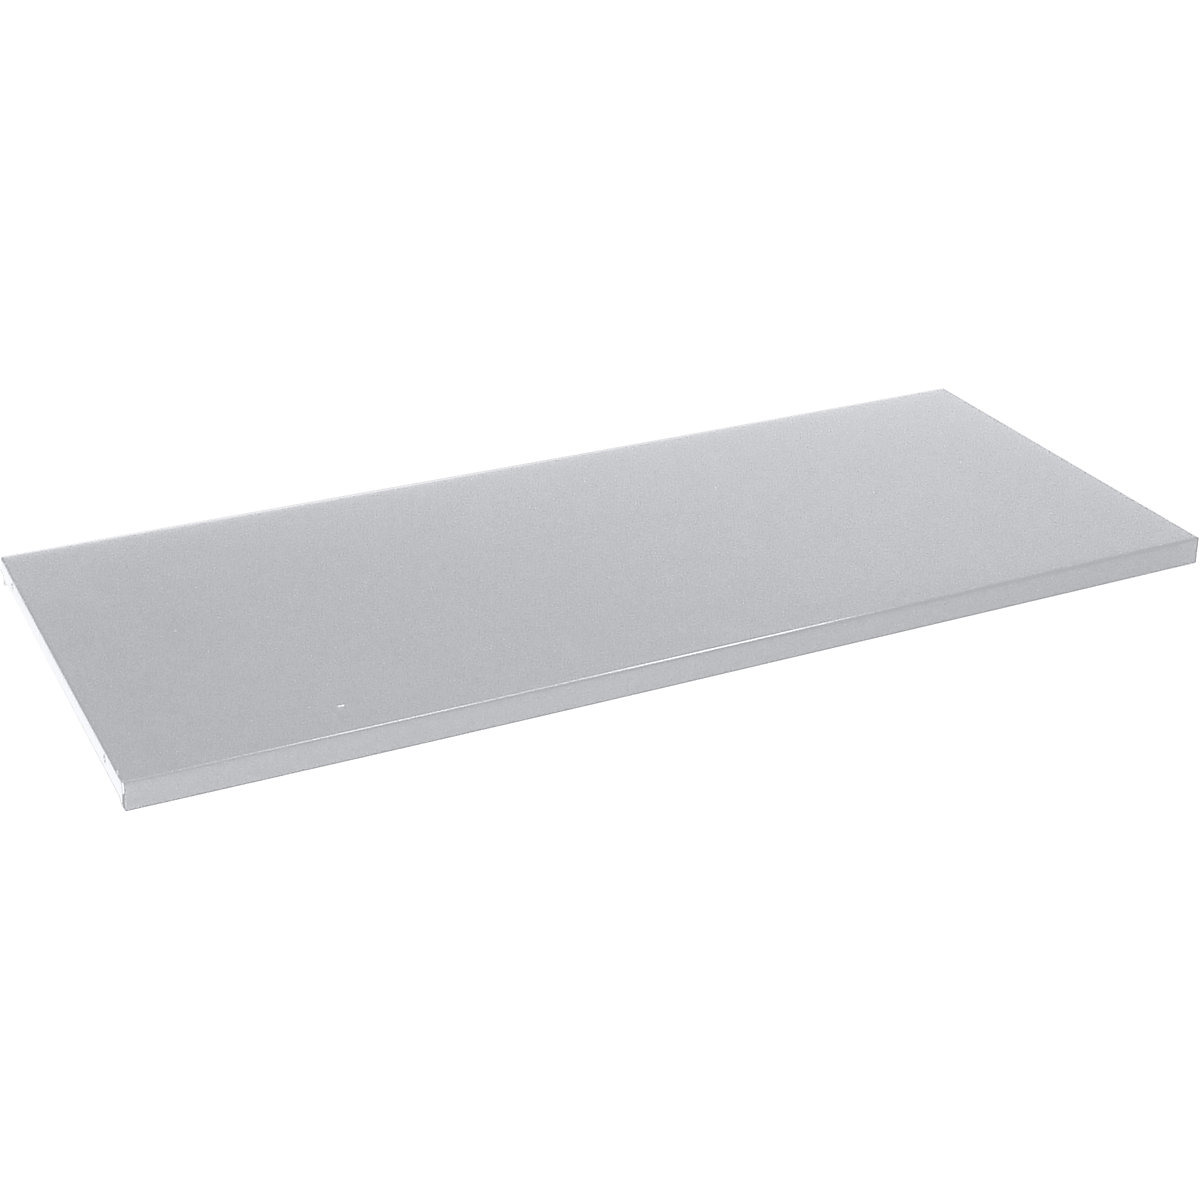 Shelf – C+P, for office cupboard, light grey, for WxD 1200 x 400 mm, pack of 2